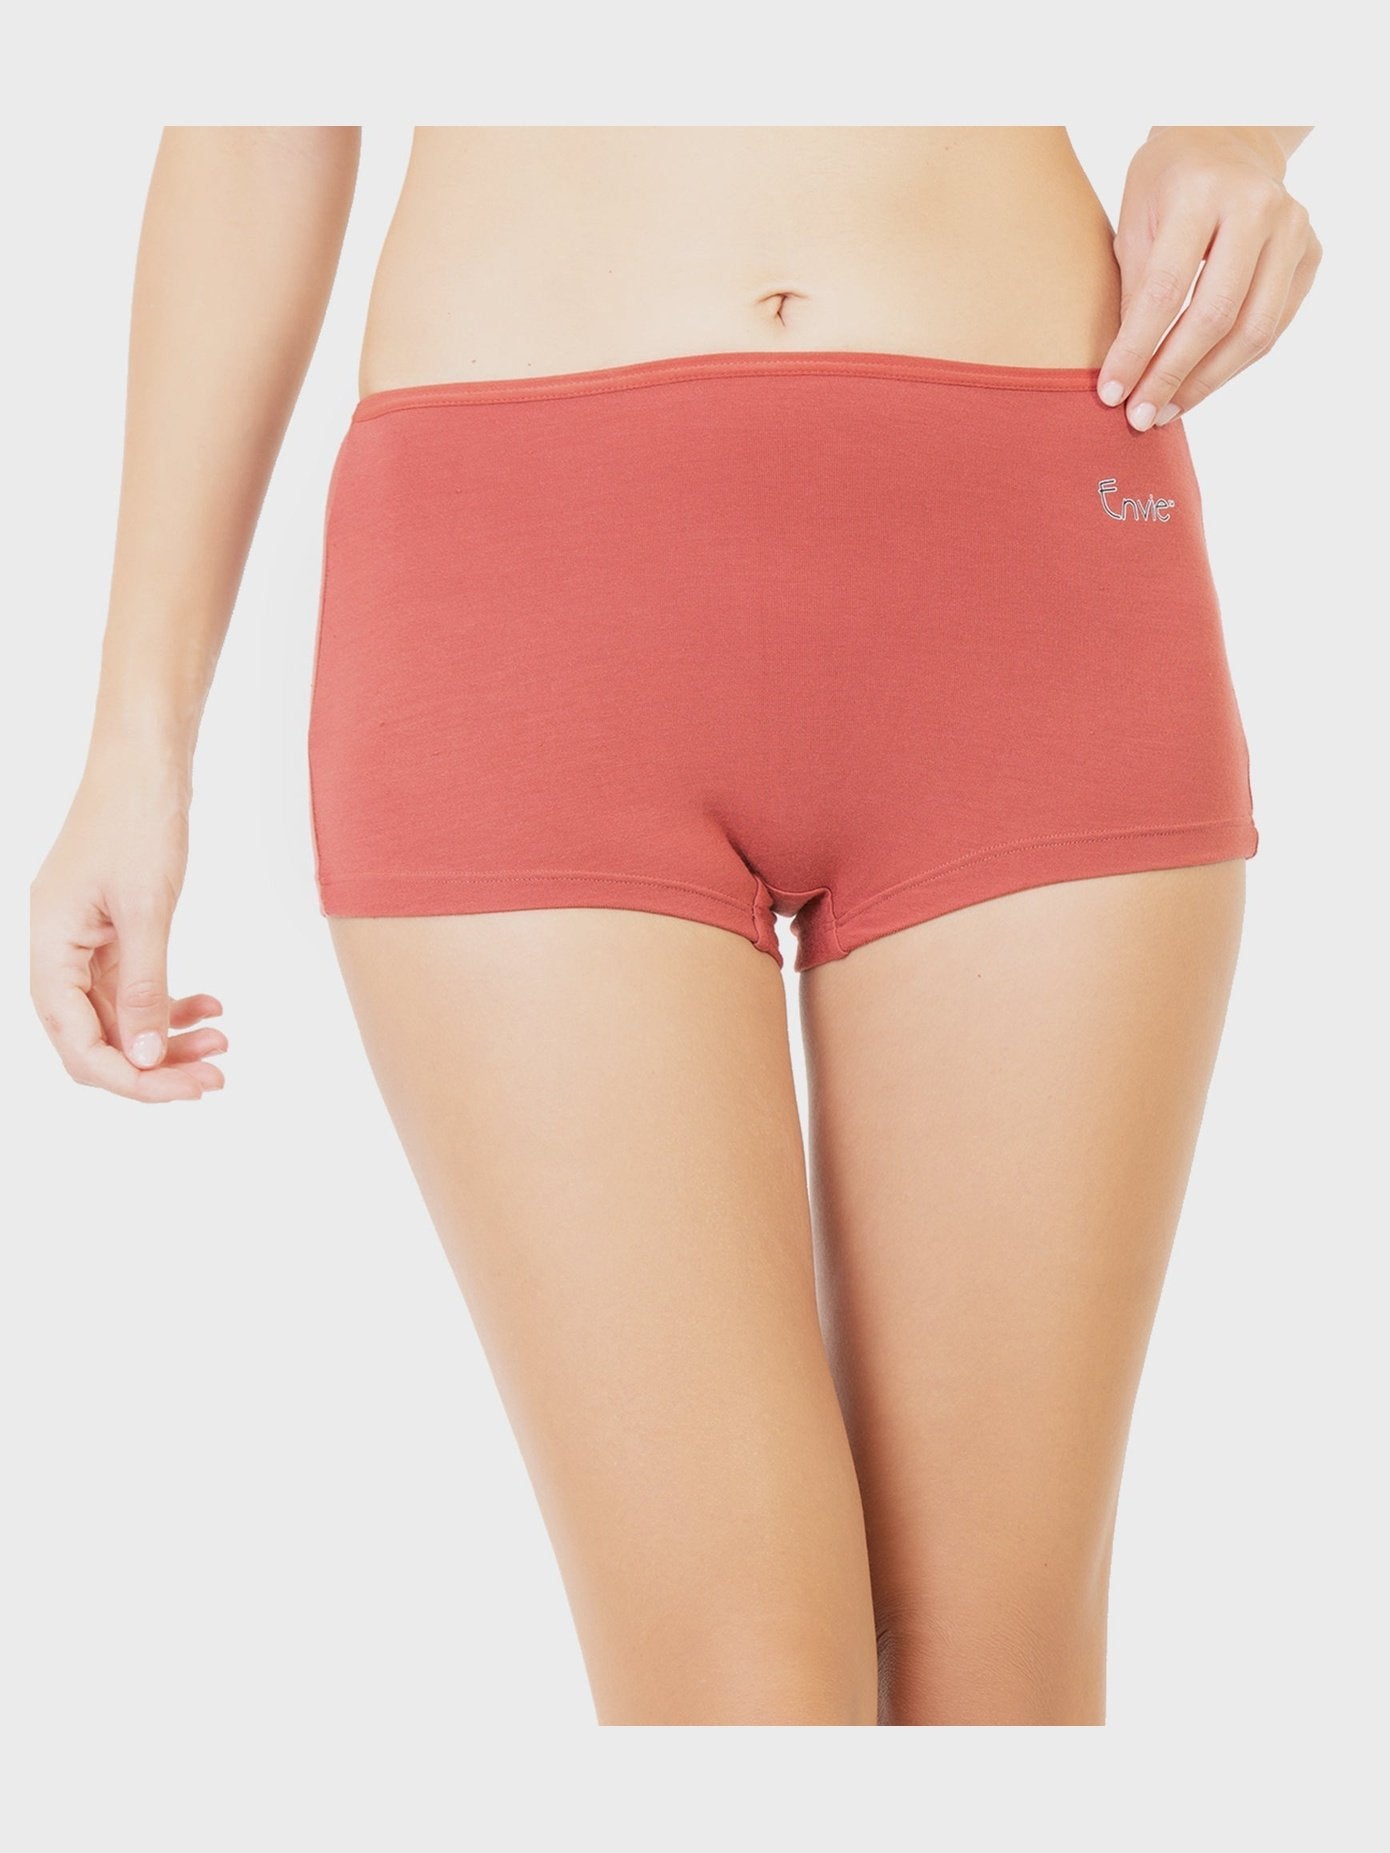 Envie Under Skirt, Boy Shorts, Super Soft fabric for soft touch comfort